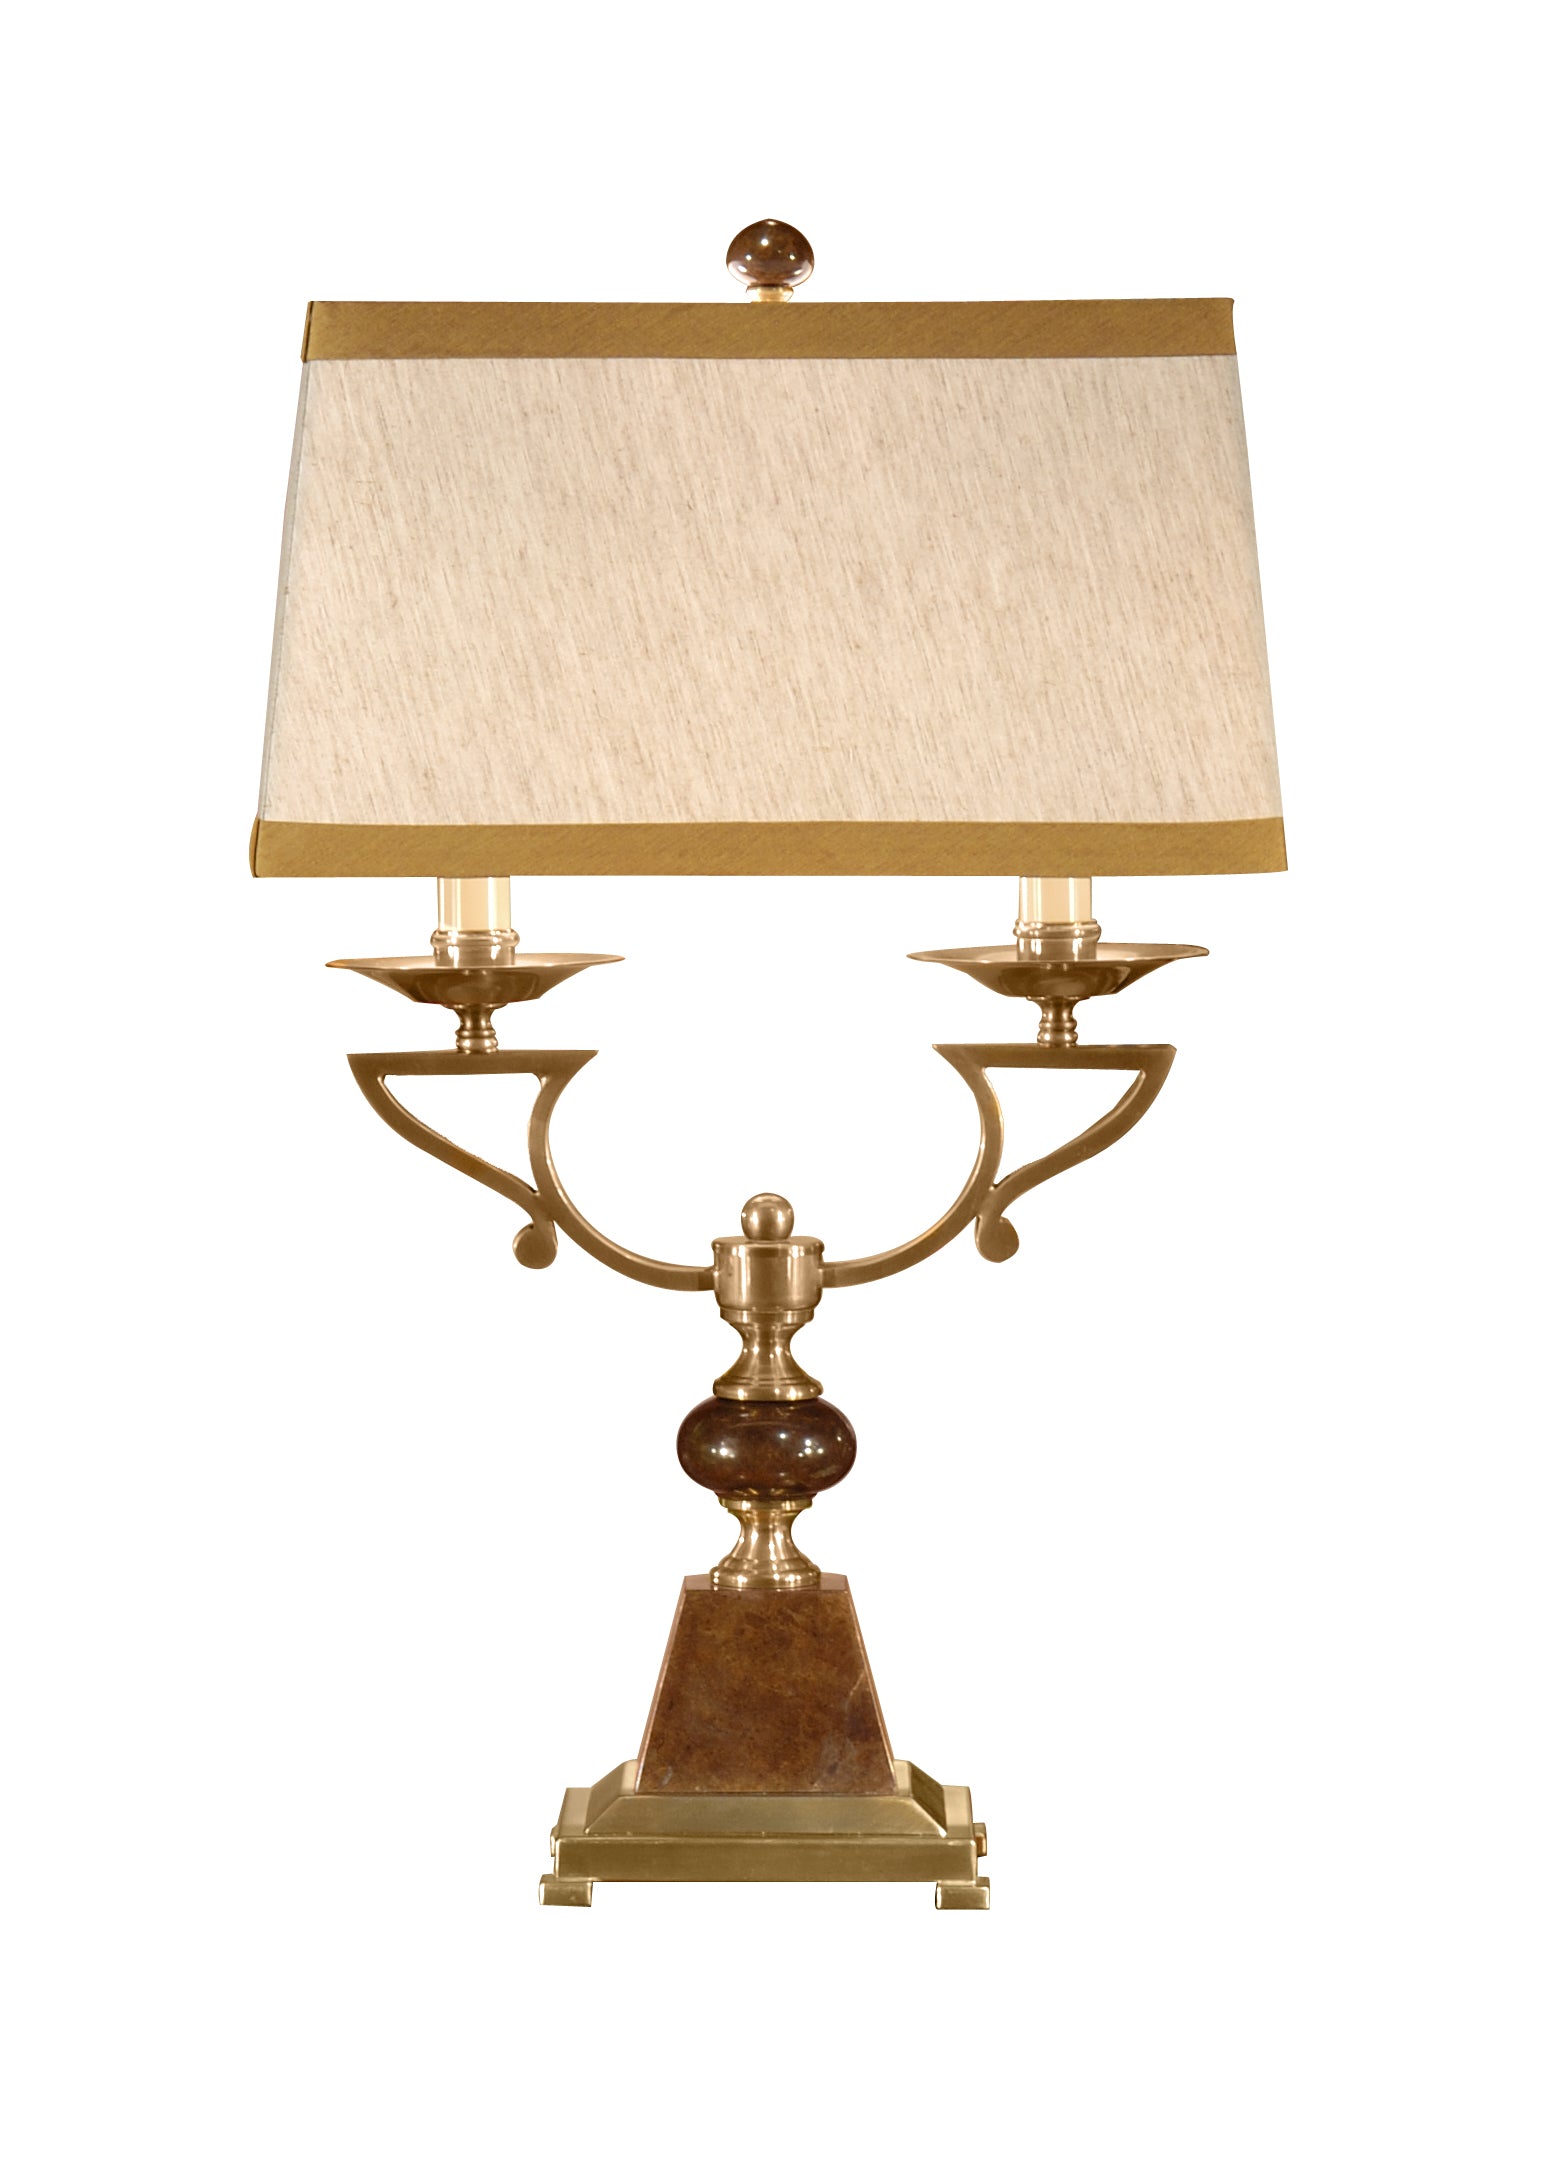 TWIN CANDLE DESK LAMP, ANTIQUED SOLID BRASS, PARCHMENT SHADE